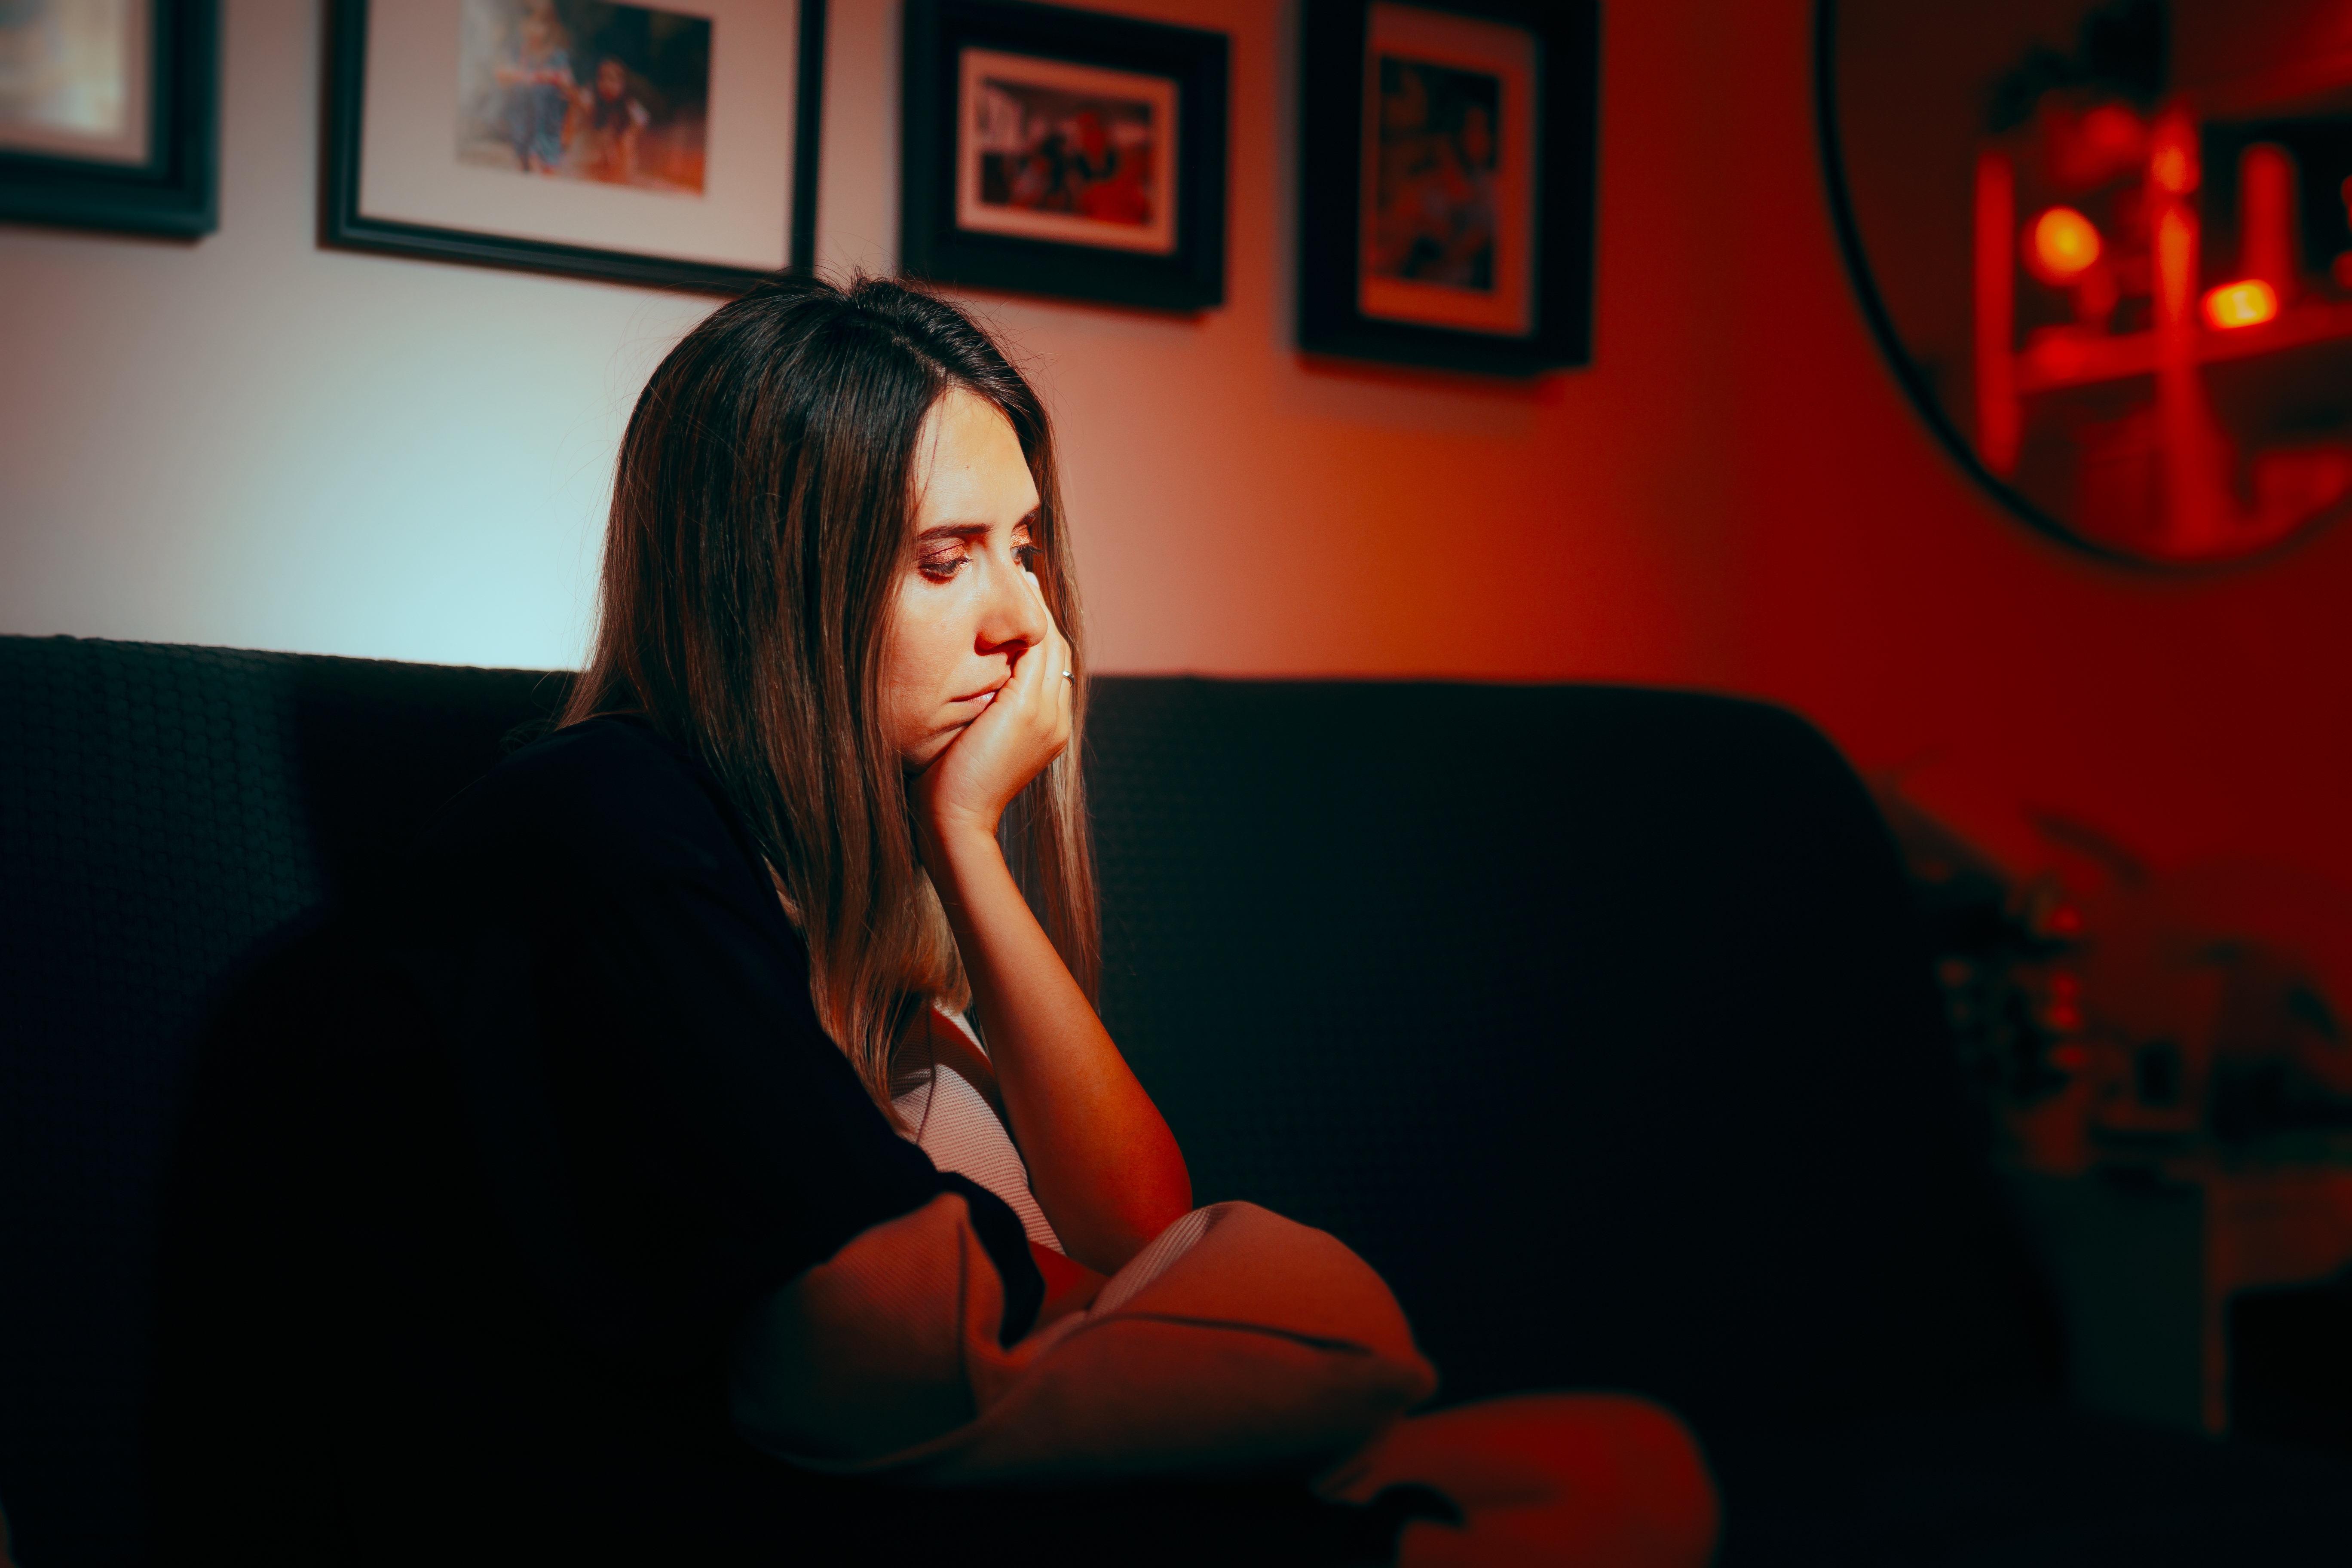 Depressed woman sitting alone at night | Source: Shutterstock